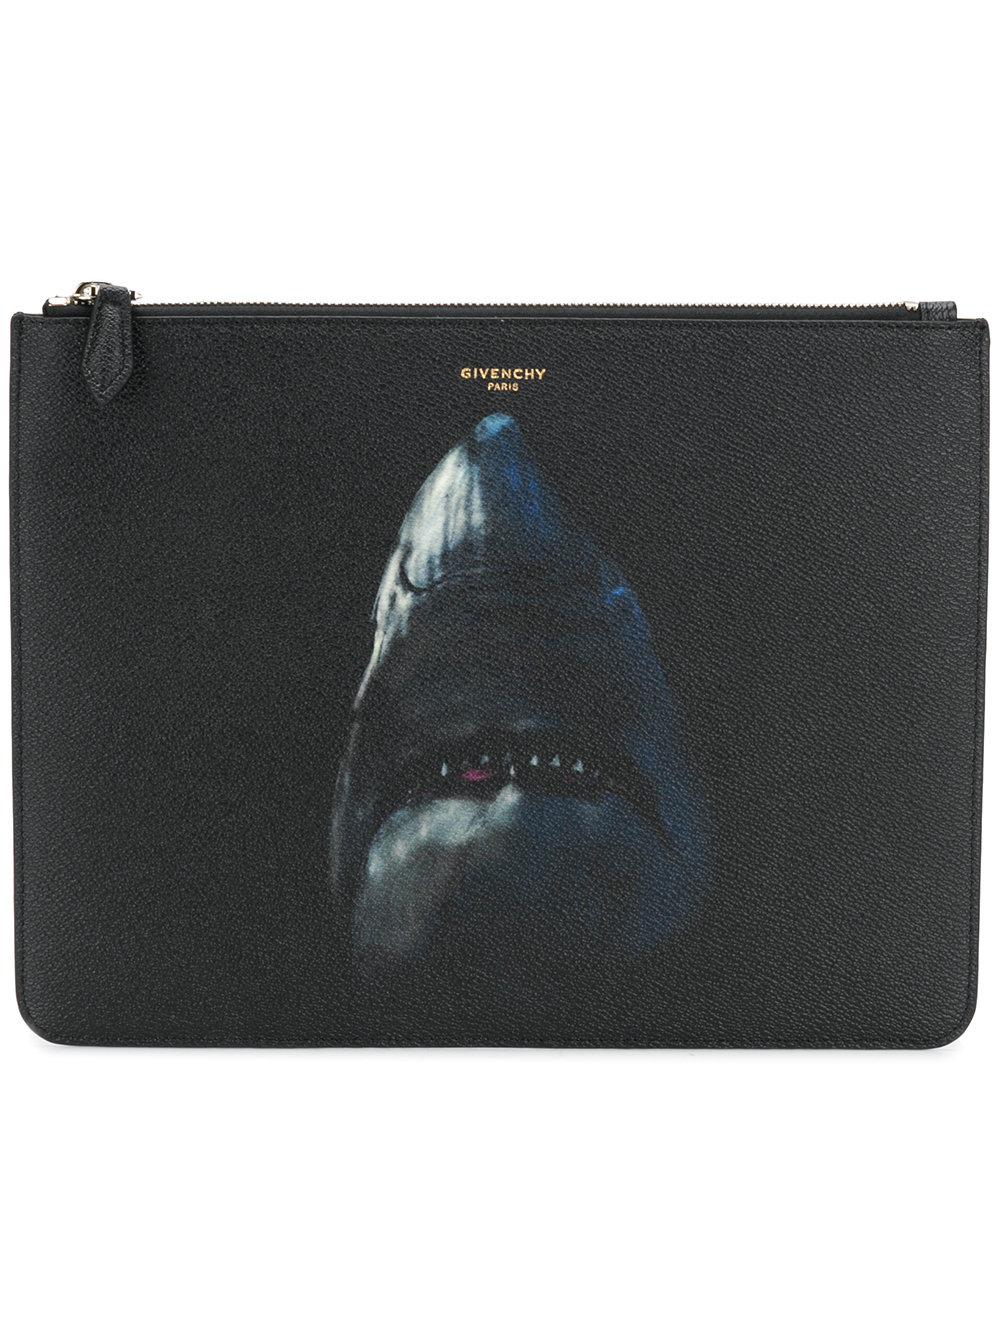 Givenchy Cotton Shark Printed Clutch in 